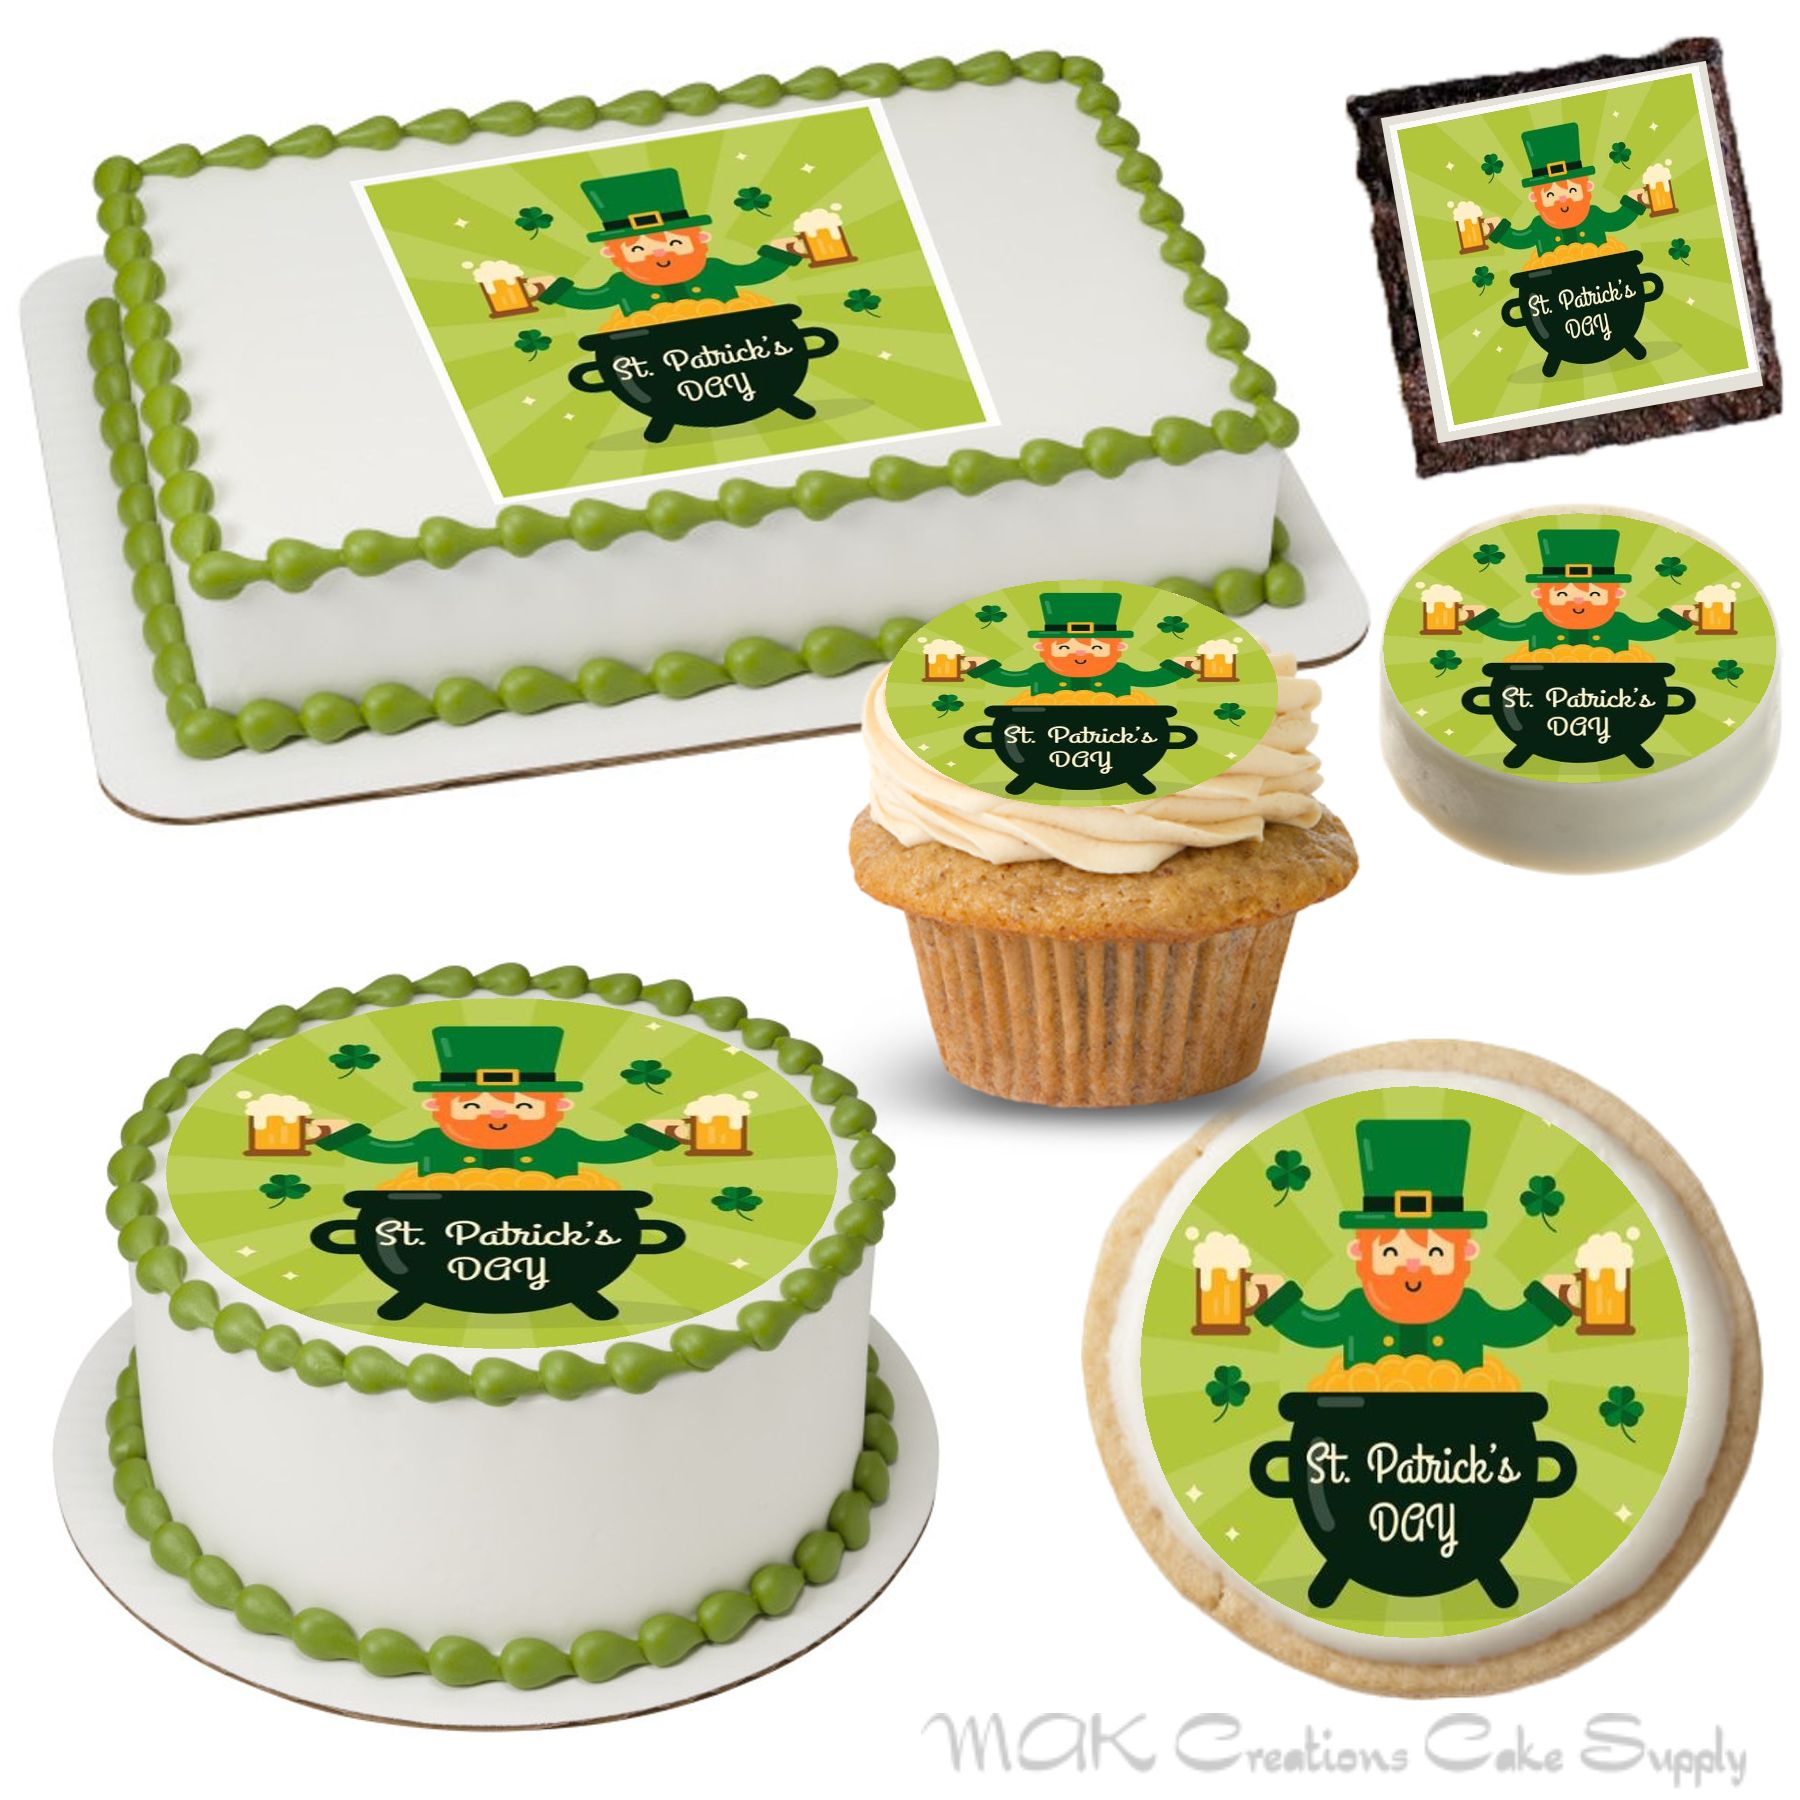 ST PATRICKS DAY EDIBLE CUPCAKE TOPPERS CAKE DECORATIONS 8075 